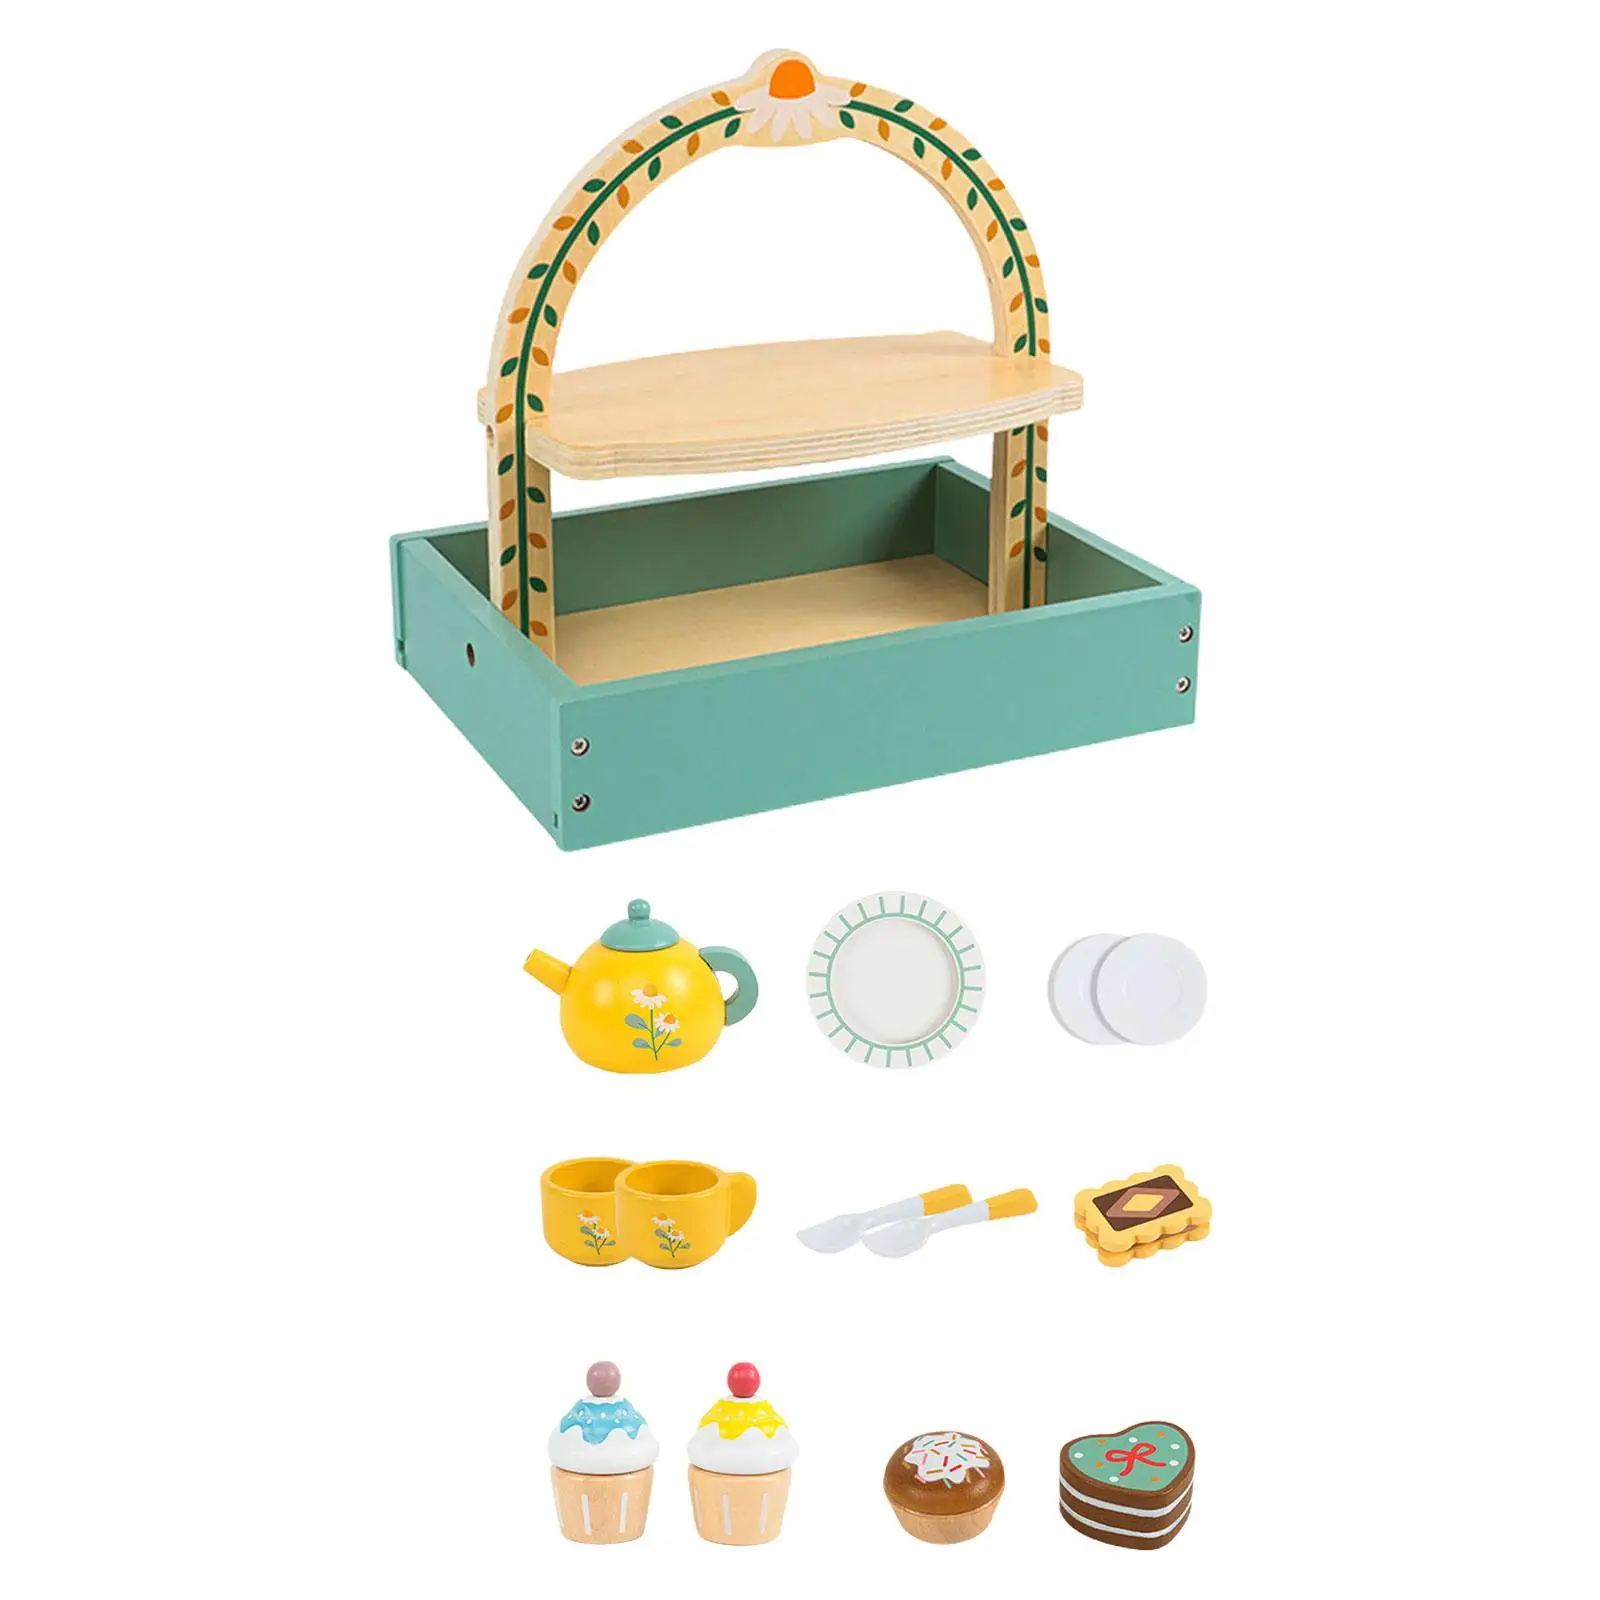 Afternoon Tea Set Educational Learning Game Simulation Toy Wooden Toy for Children Gift Age 3-6 Parent Kindergarten Child